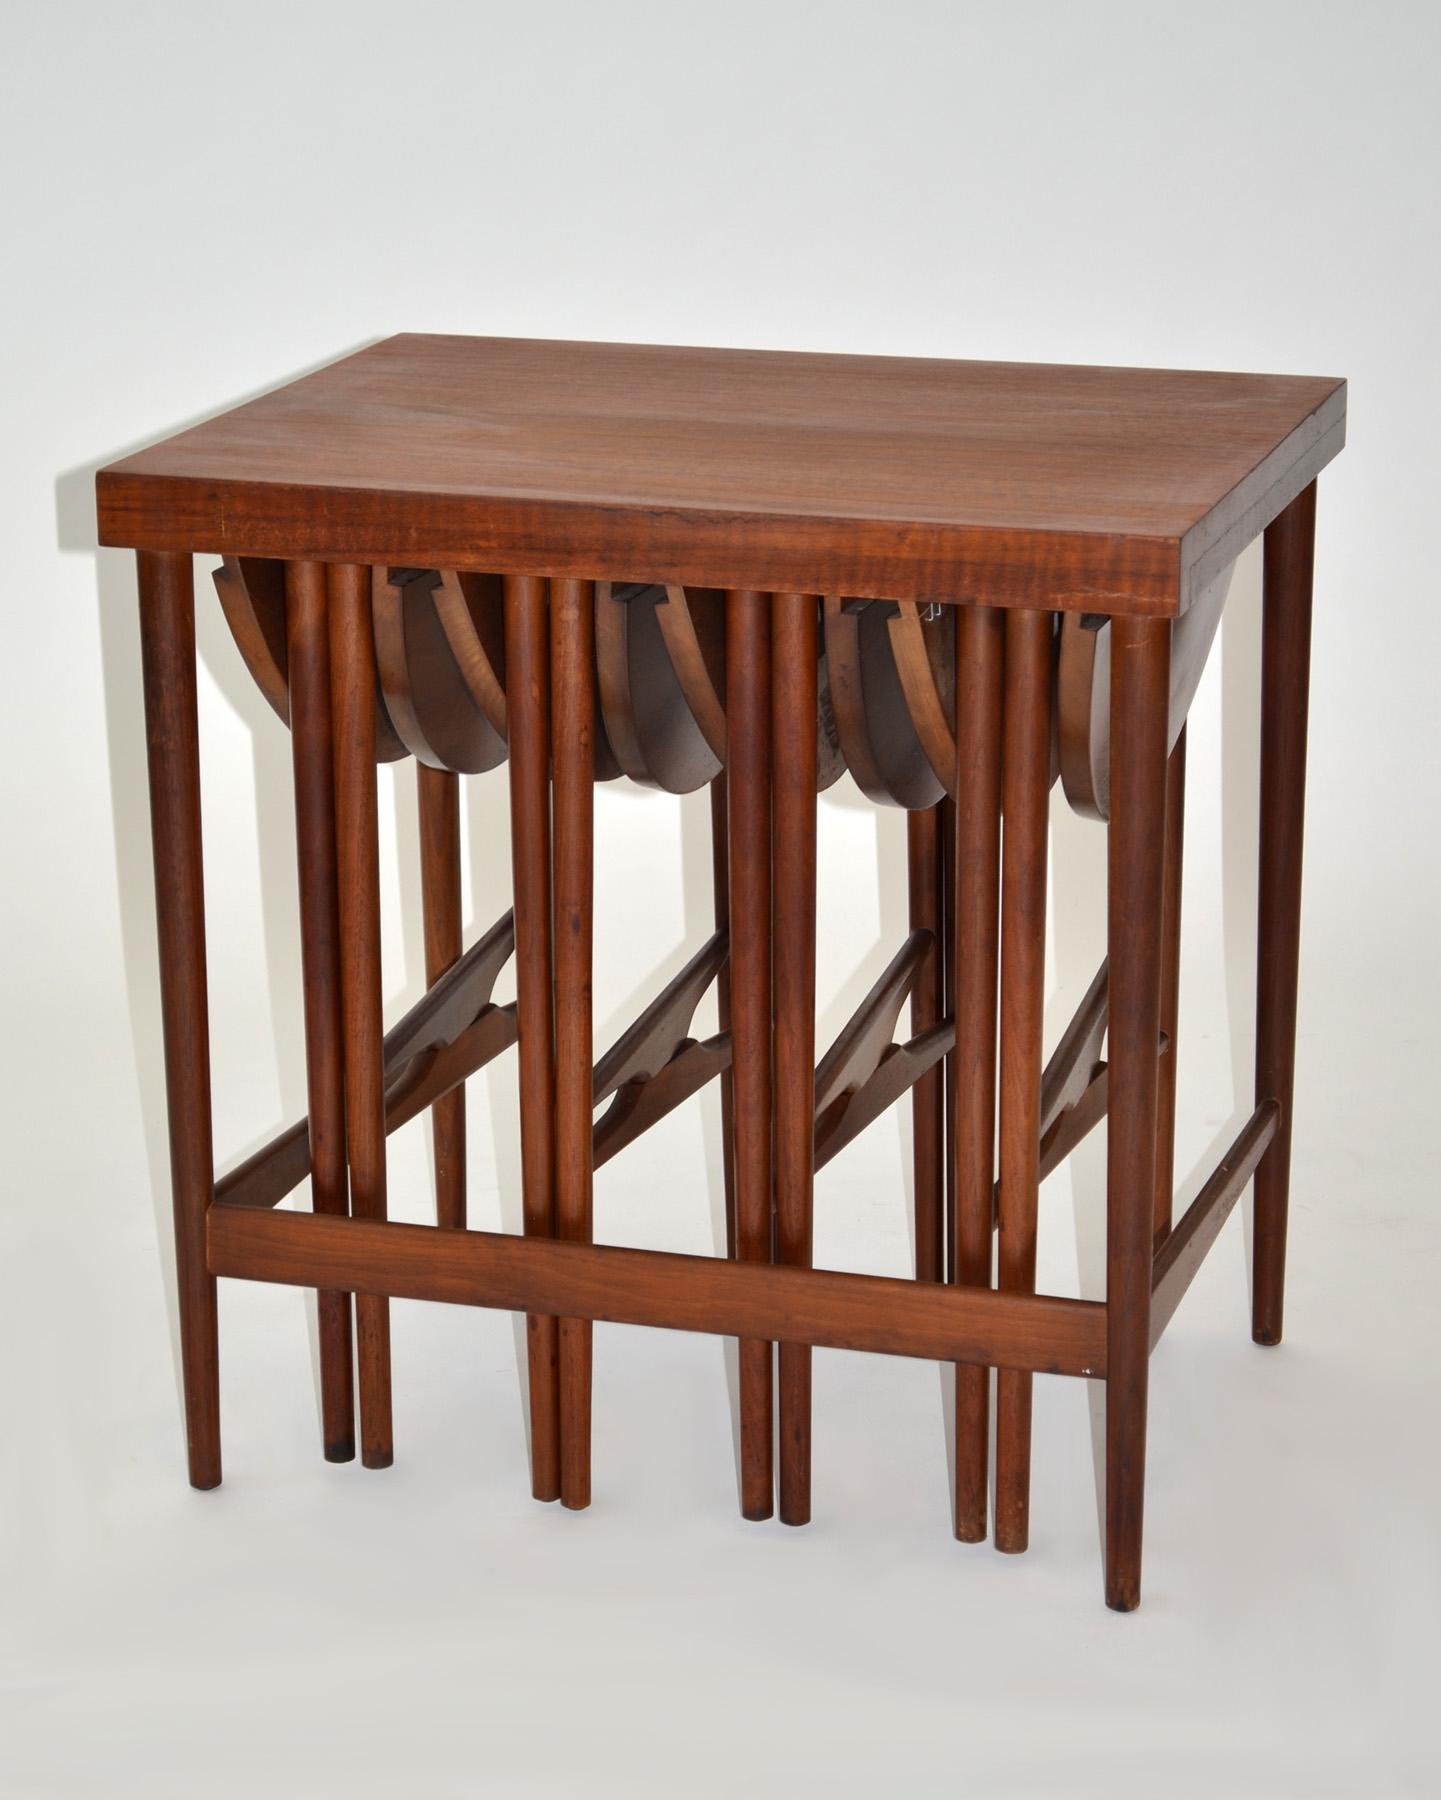 Bertha Schaefer for Singer & Sons Walnut Nesting Serving Tables 1950s

Introducing an iconic creation from the mid-century modern era, we proudly present the exceptional set of nesting serving tables meticulously crafted by the visionary Bertha